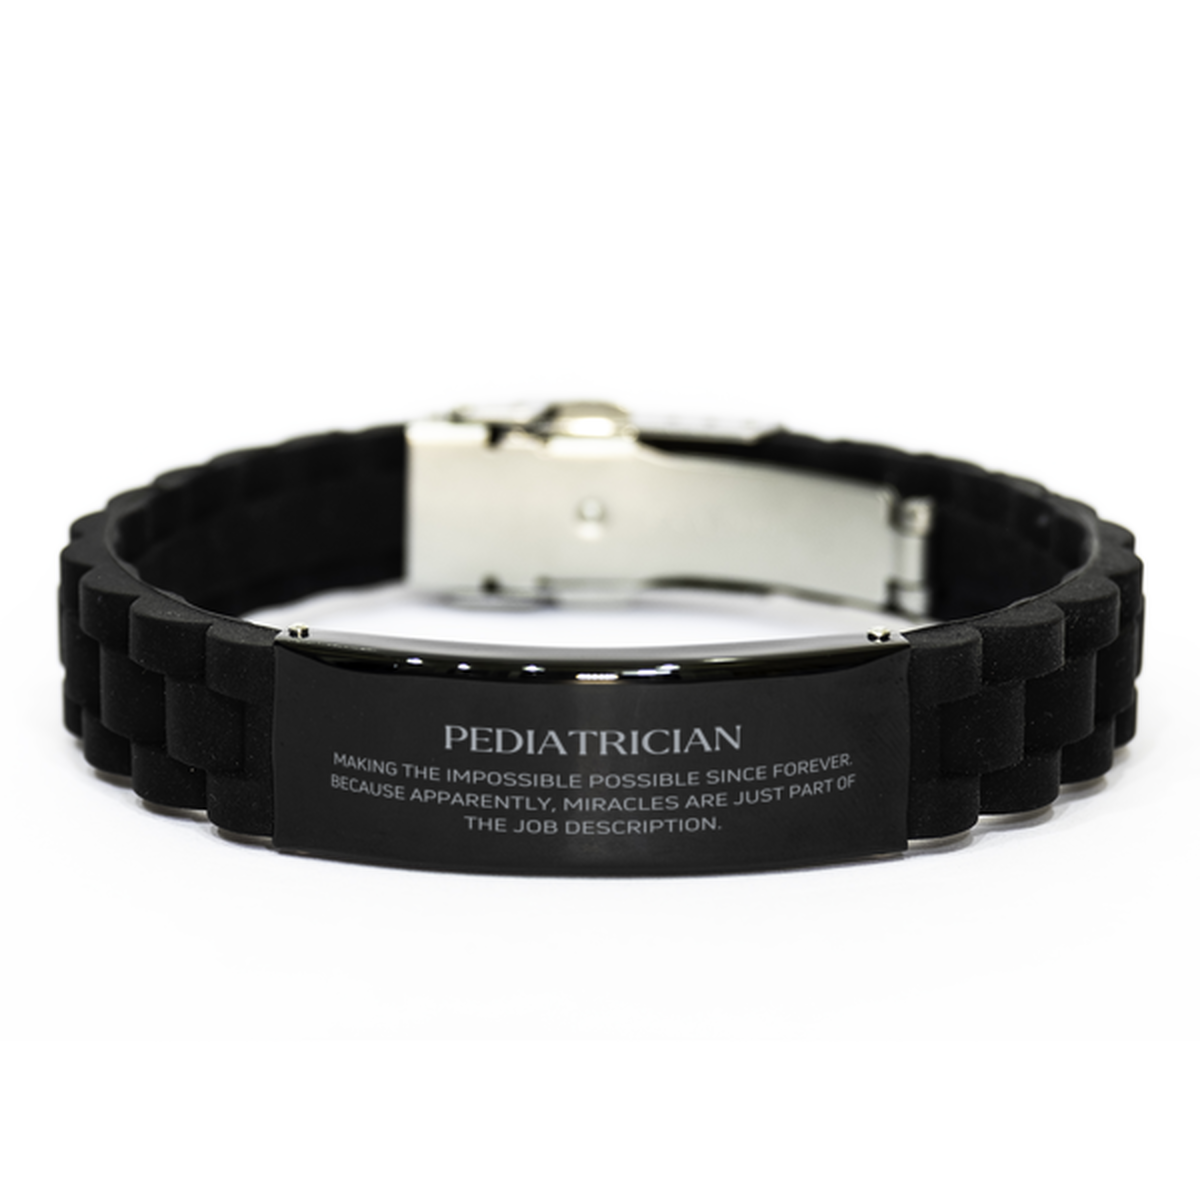 Funny Pediatrician Gifts, Miracles are just part of the job description, Inspirational Birthday Black Glidelock Clasp Bracelet For Pediatrician, Men, Women, Coworkers, Friends, Boss